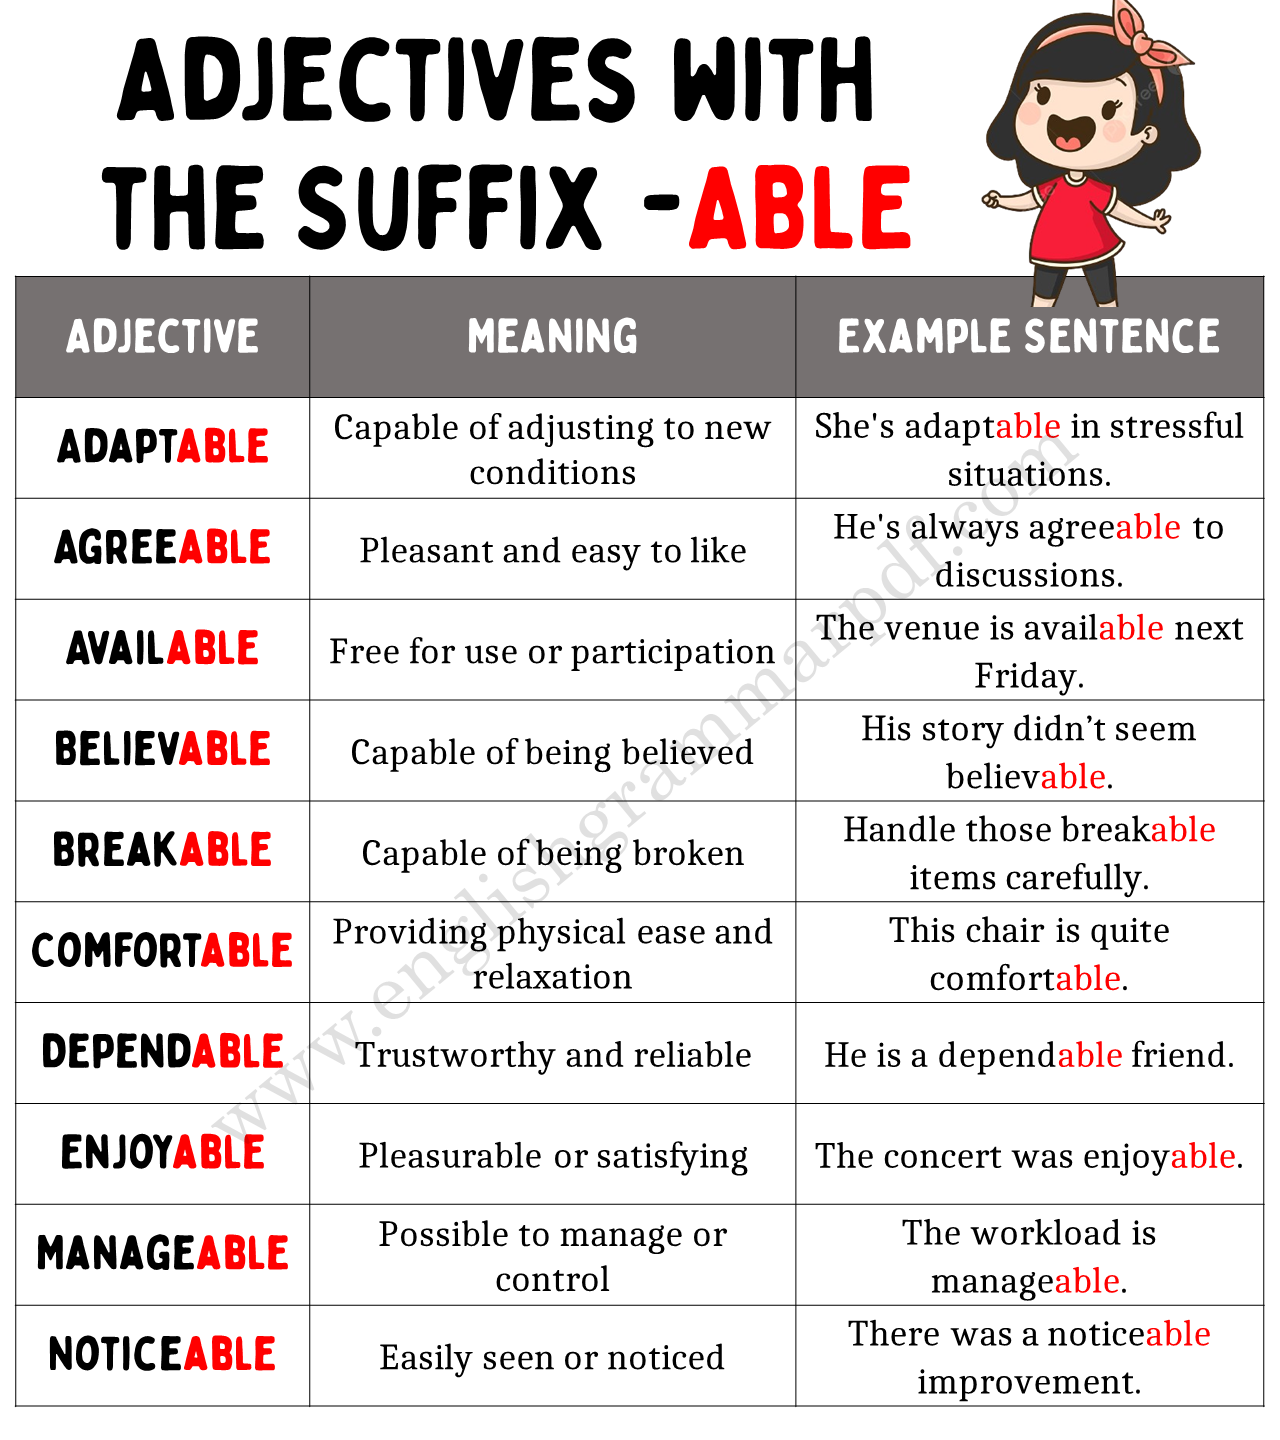 Adjectives with the Suffix ABLE